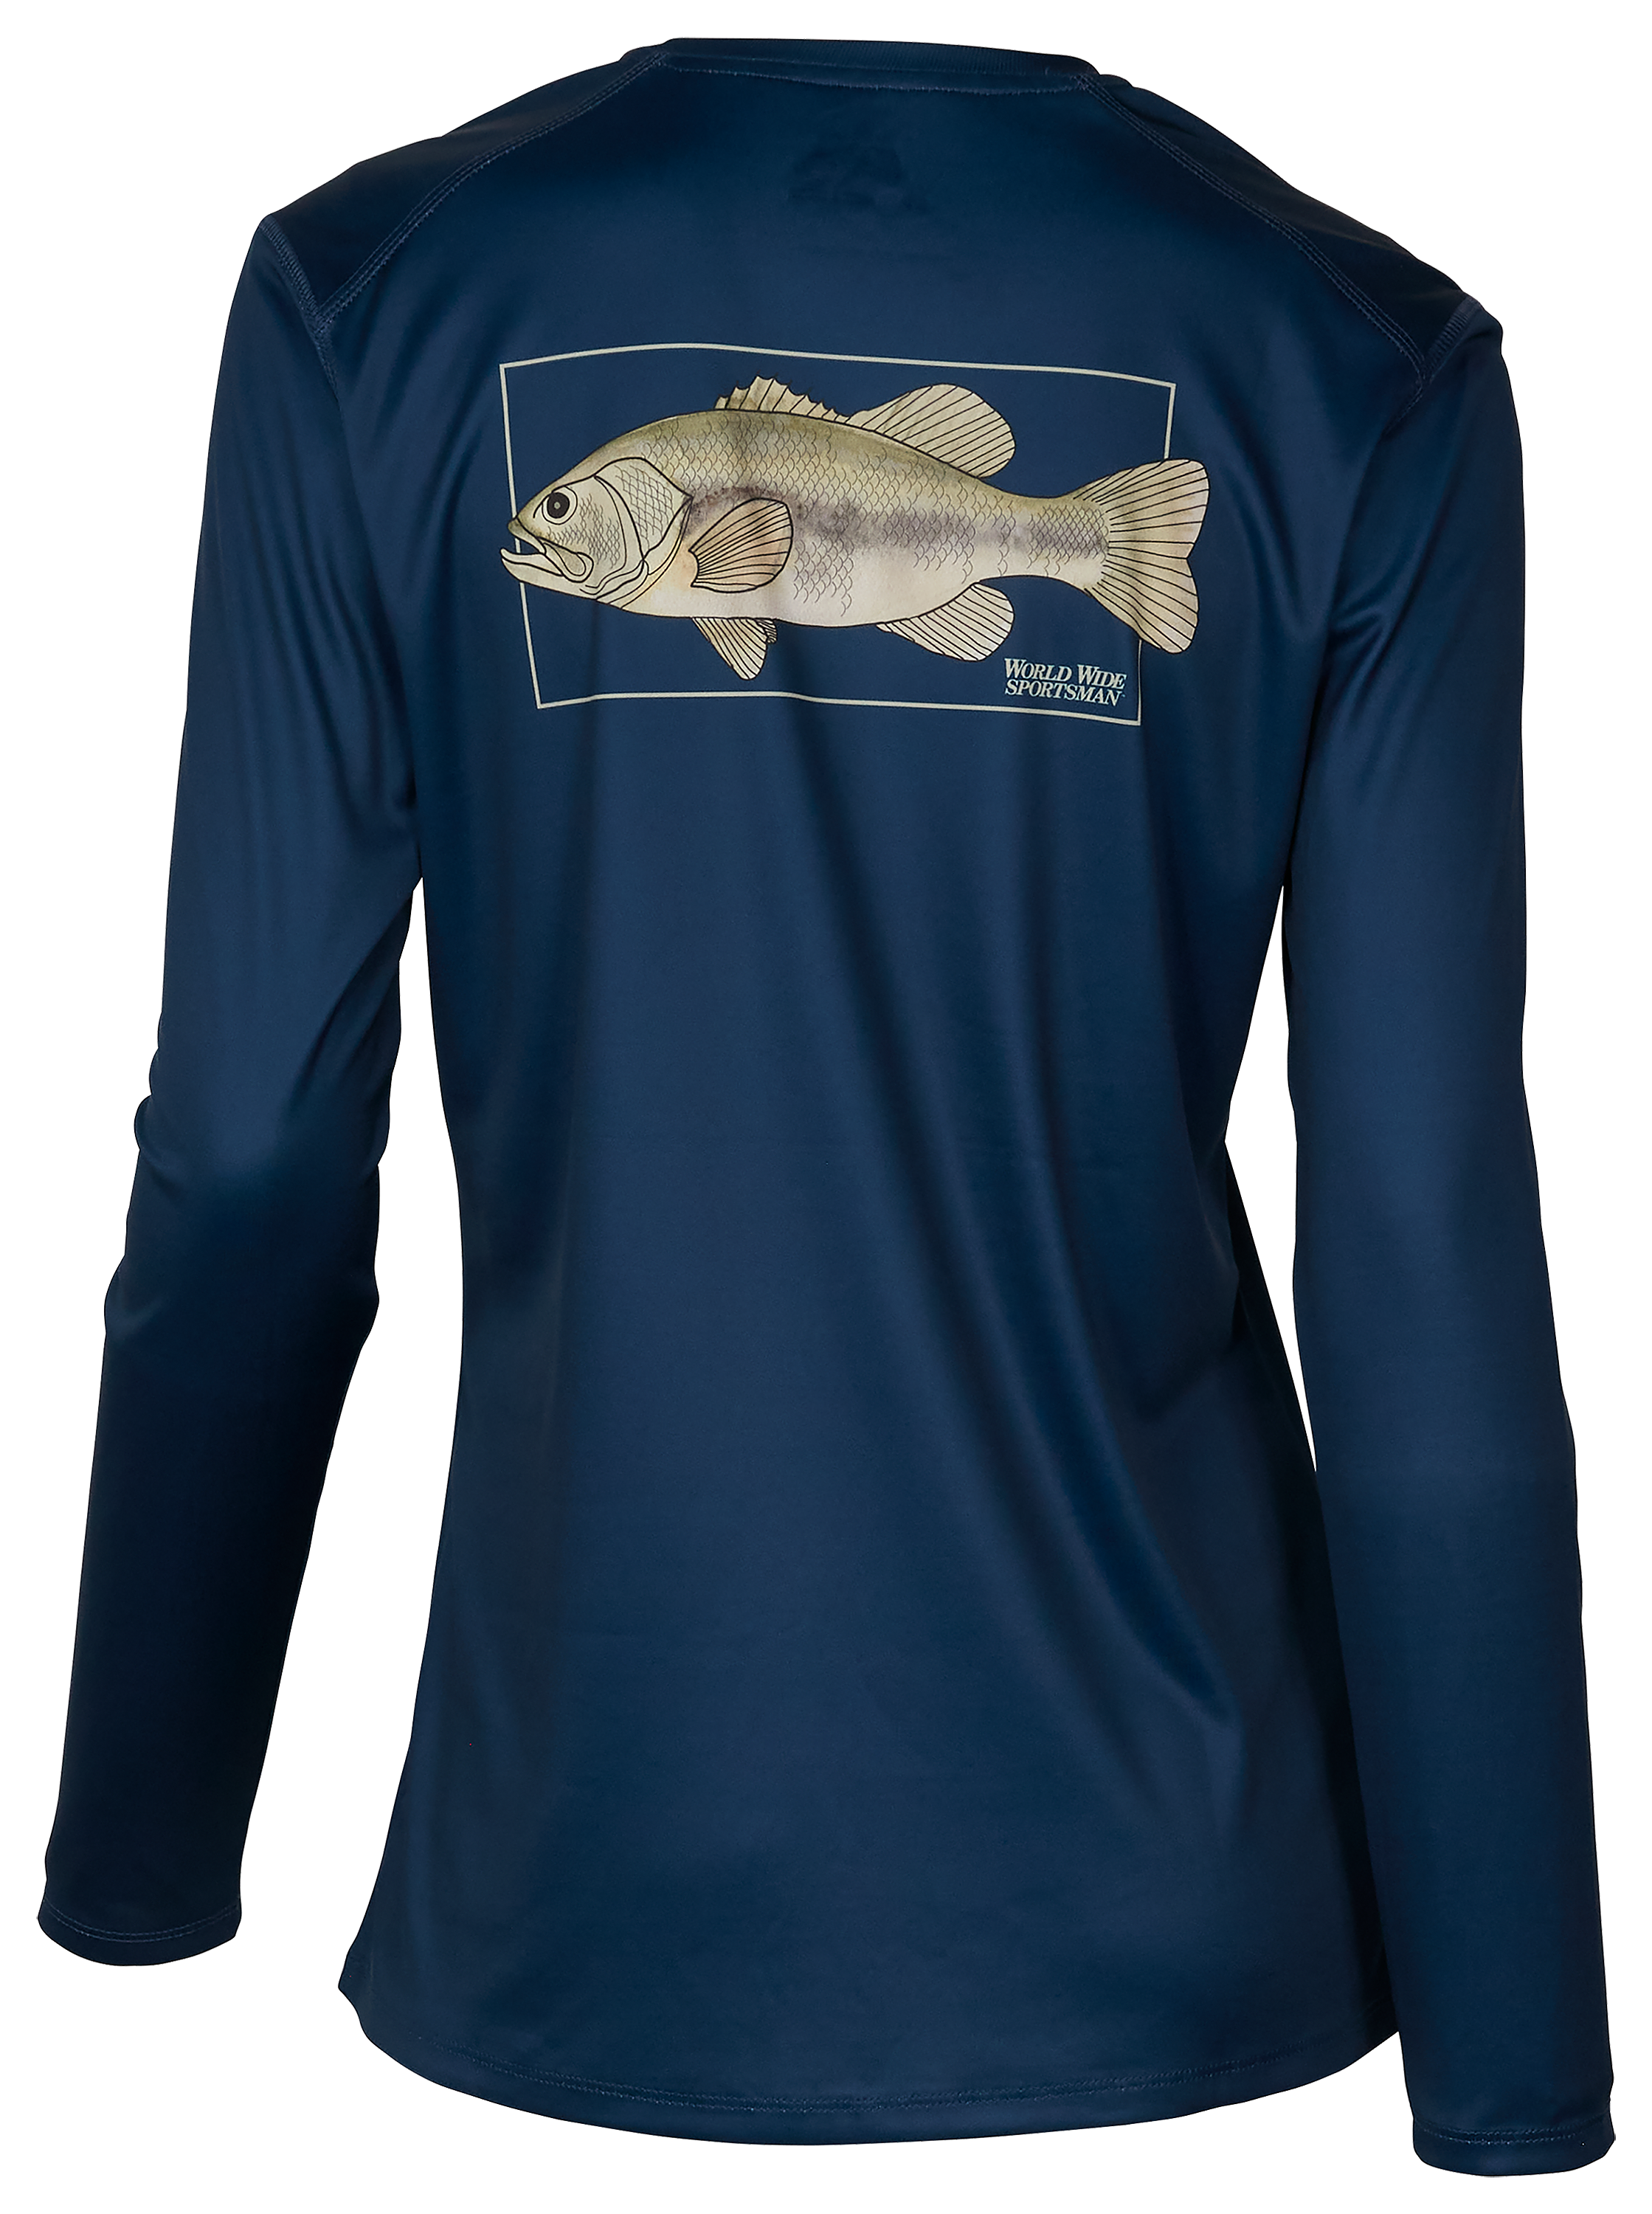 World Wide Sportsman Angler All About Bass Graphic Long-Sleeve Shirt for Ladies - L